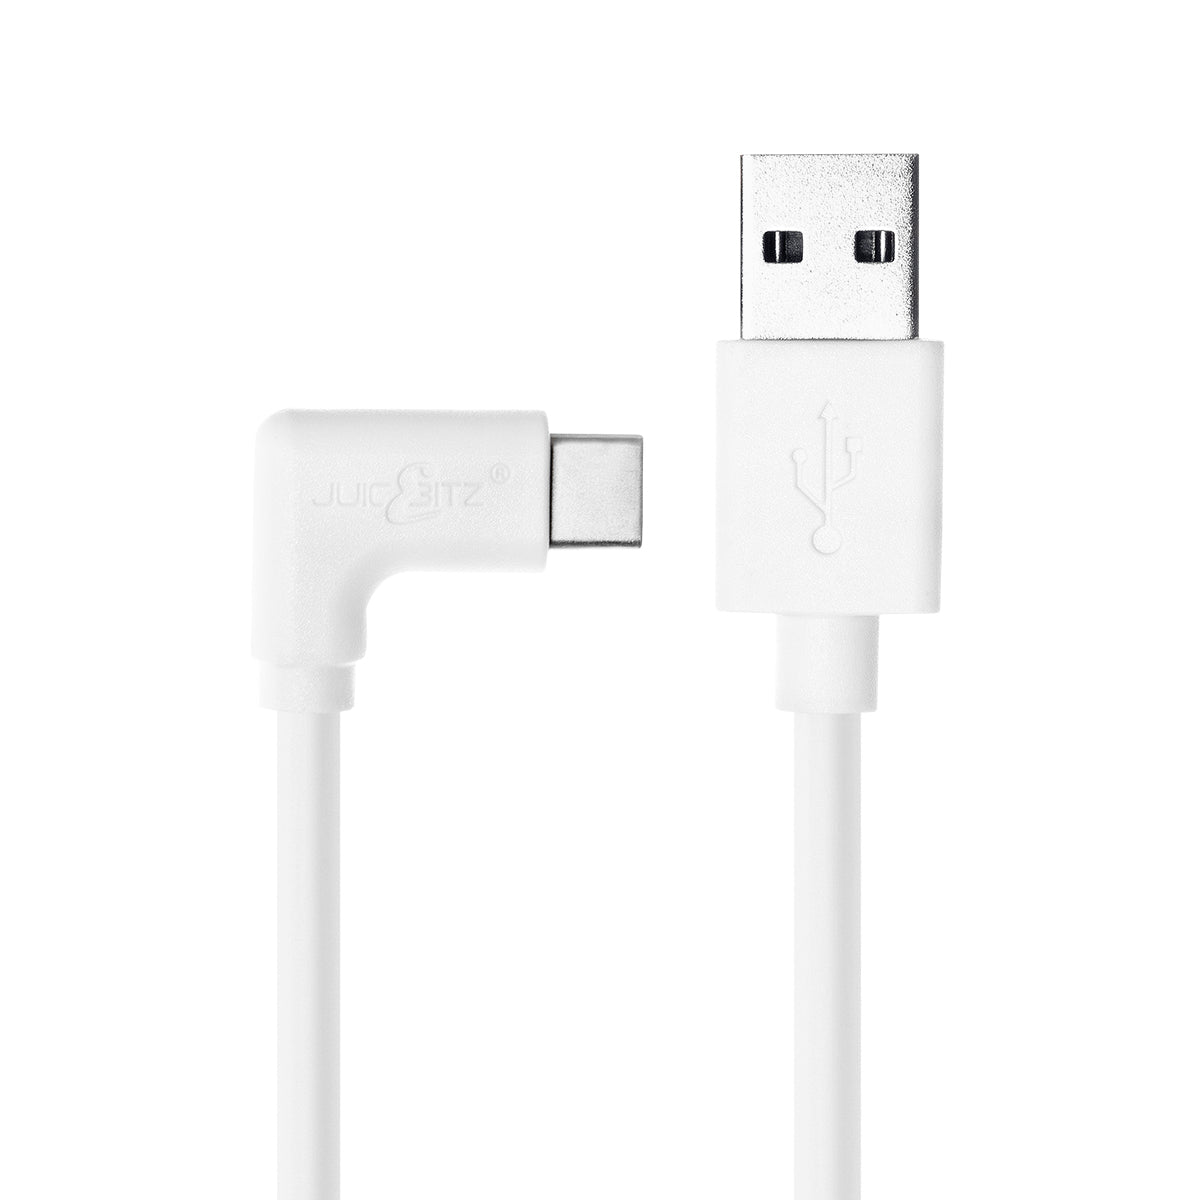 USB 2.0 Male to Angled USB-C 3A Fast Charger Data Cable - White